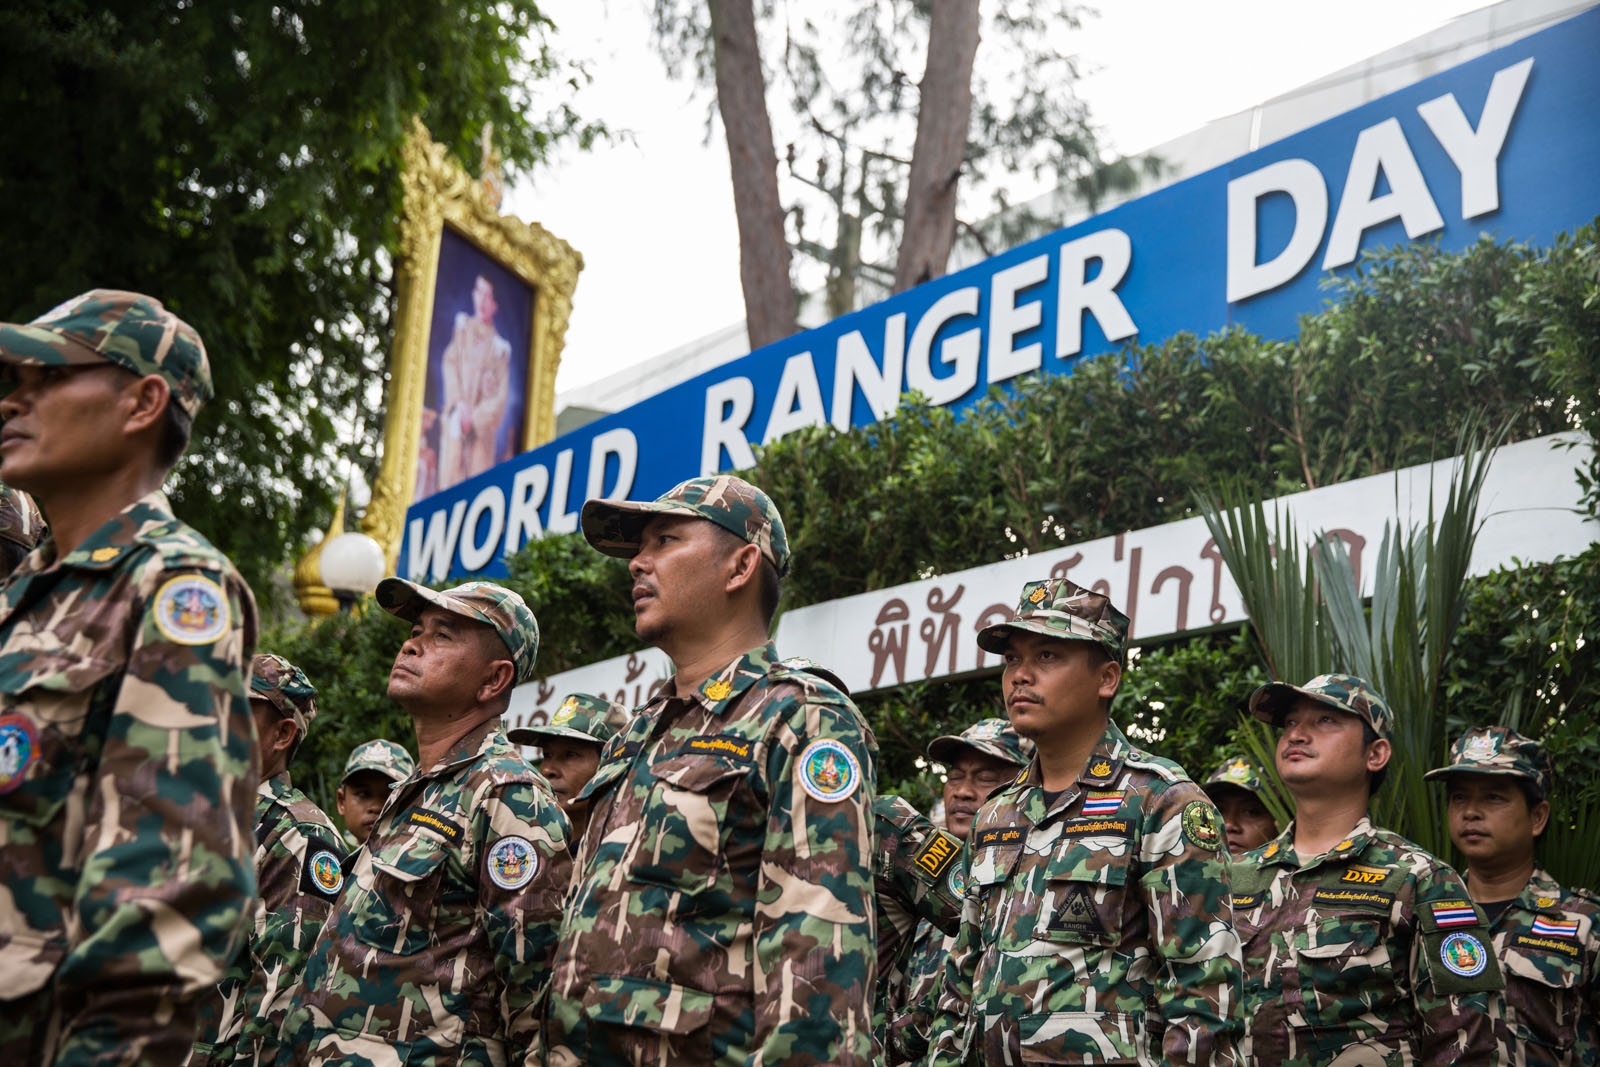 PROTECTING THAILANDS ROSEWOOD - Thai Forest Rangers from every National Park in Thailand...